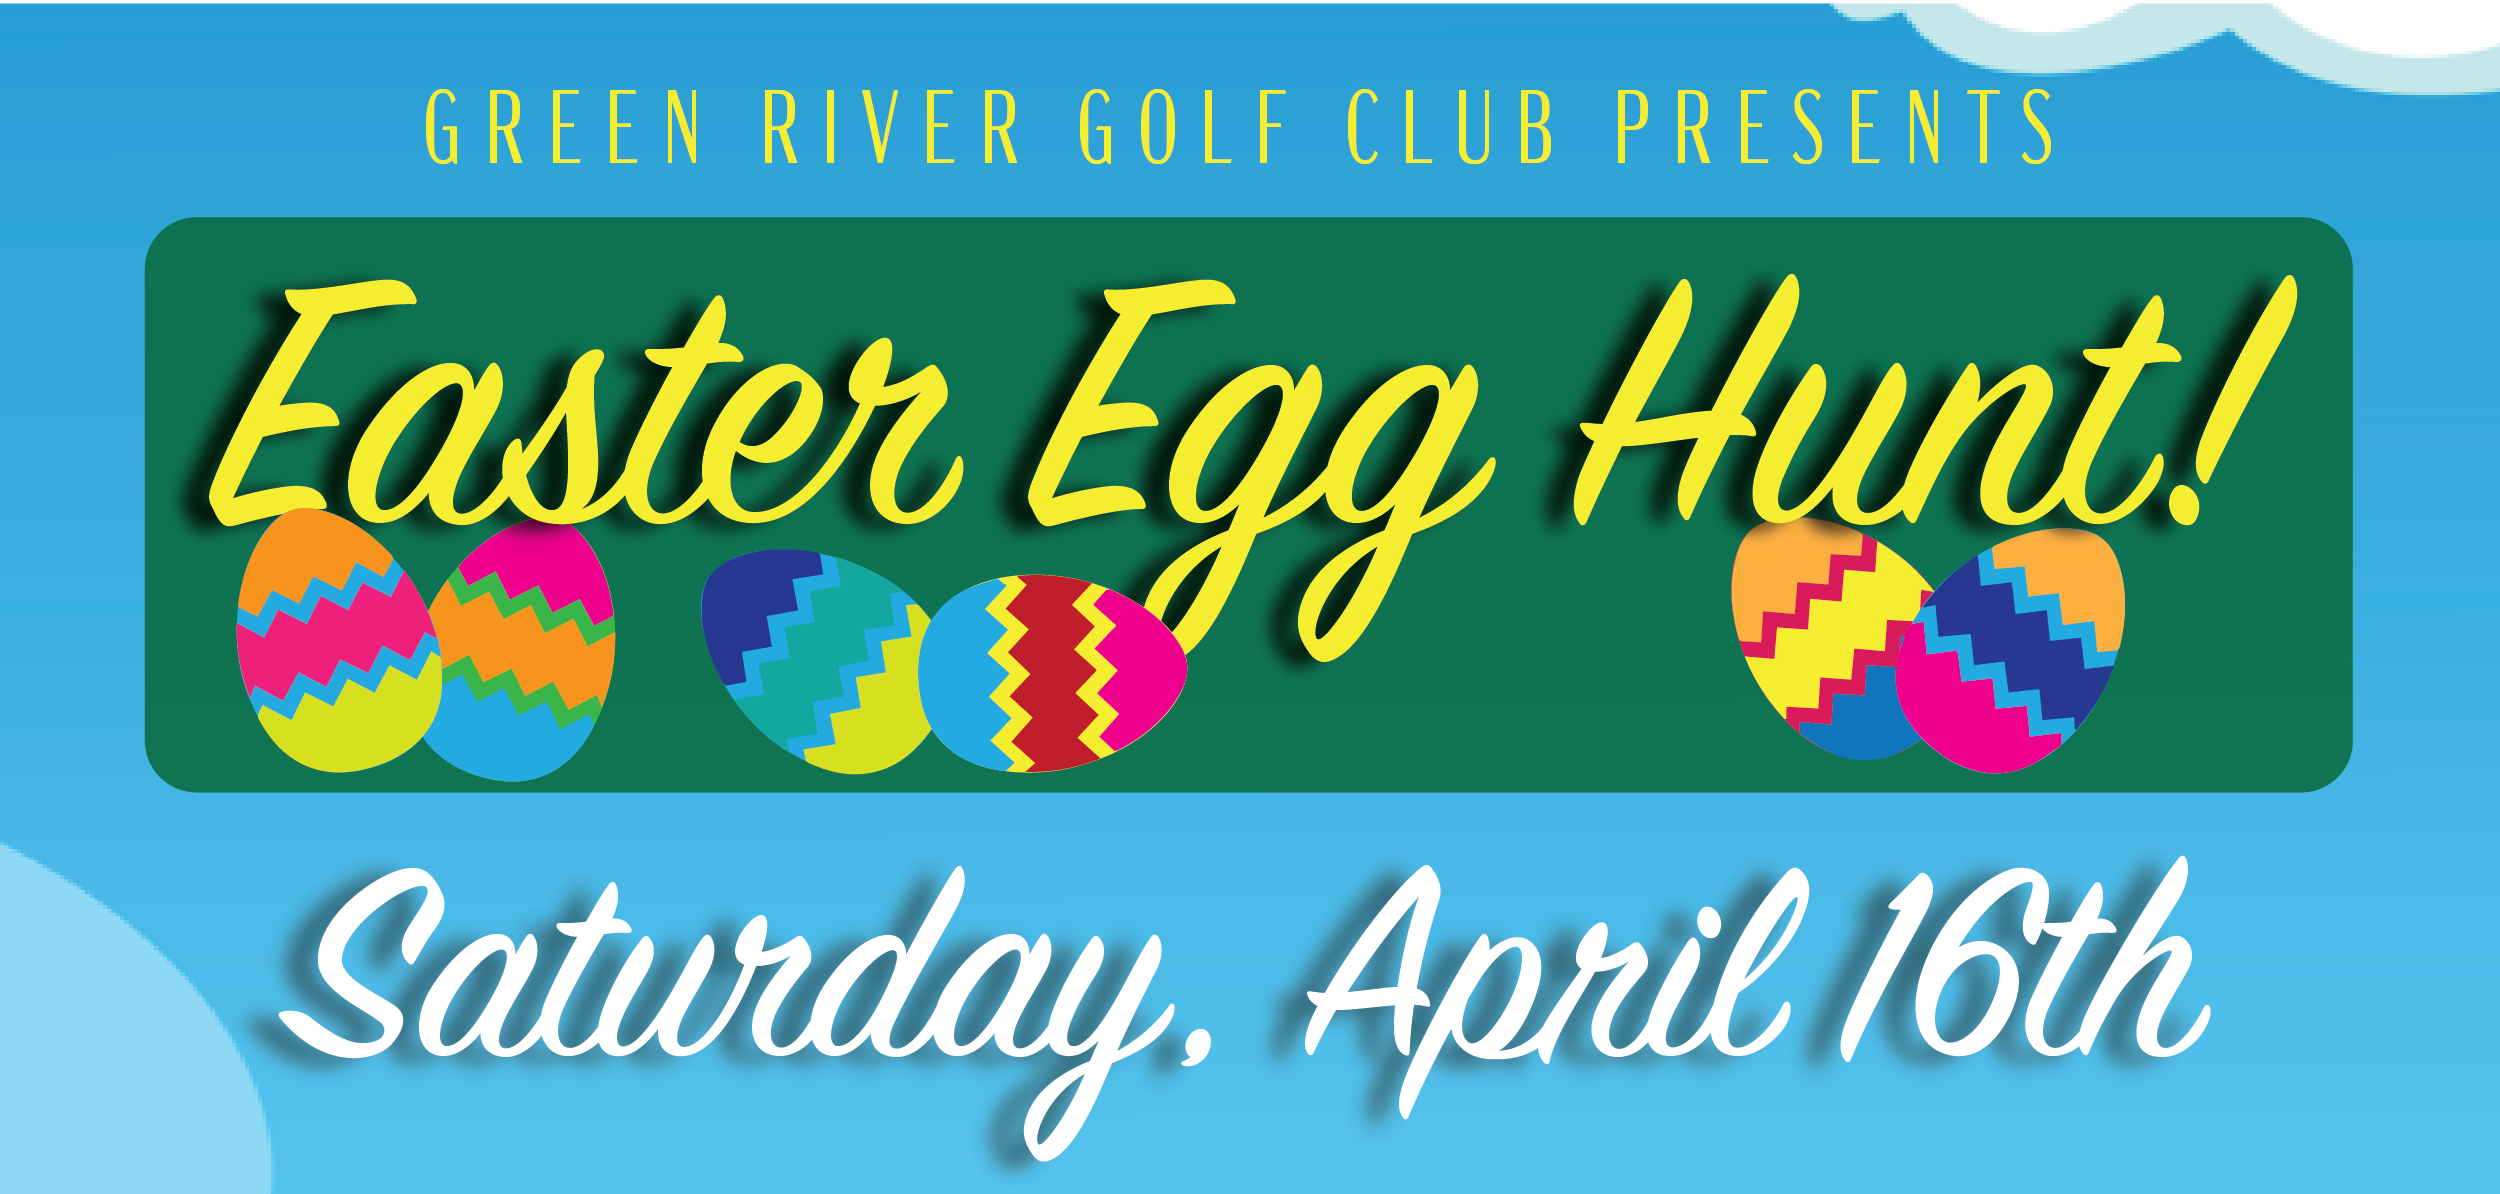 Green River Golf Course Easter Egg Hunt, Saturday April 16th